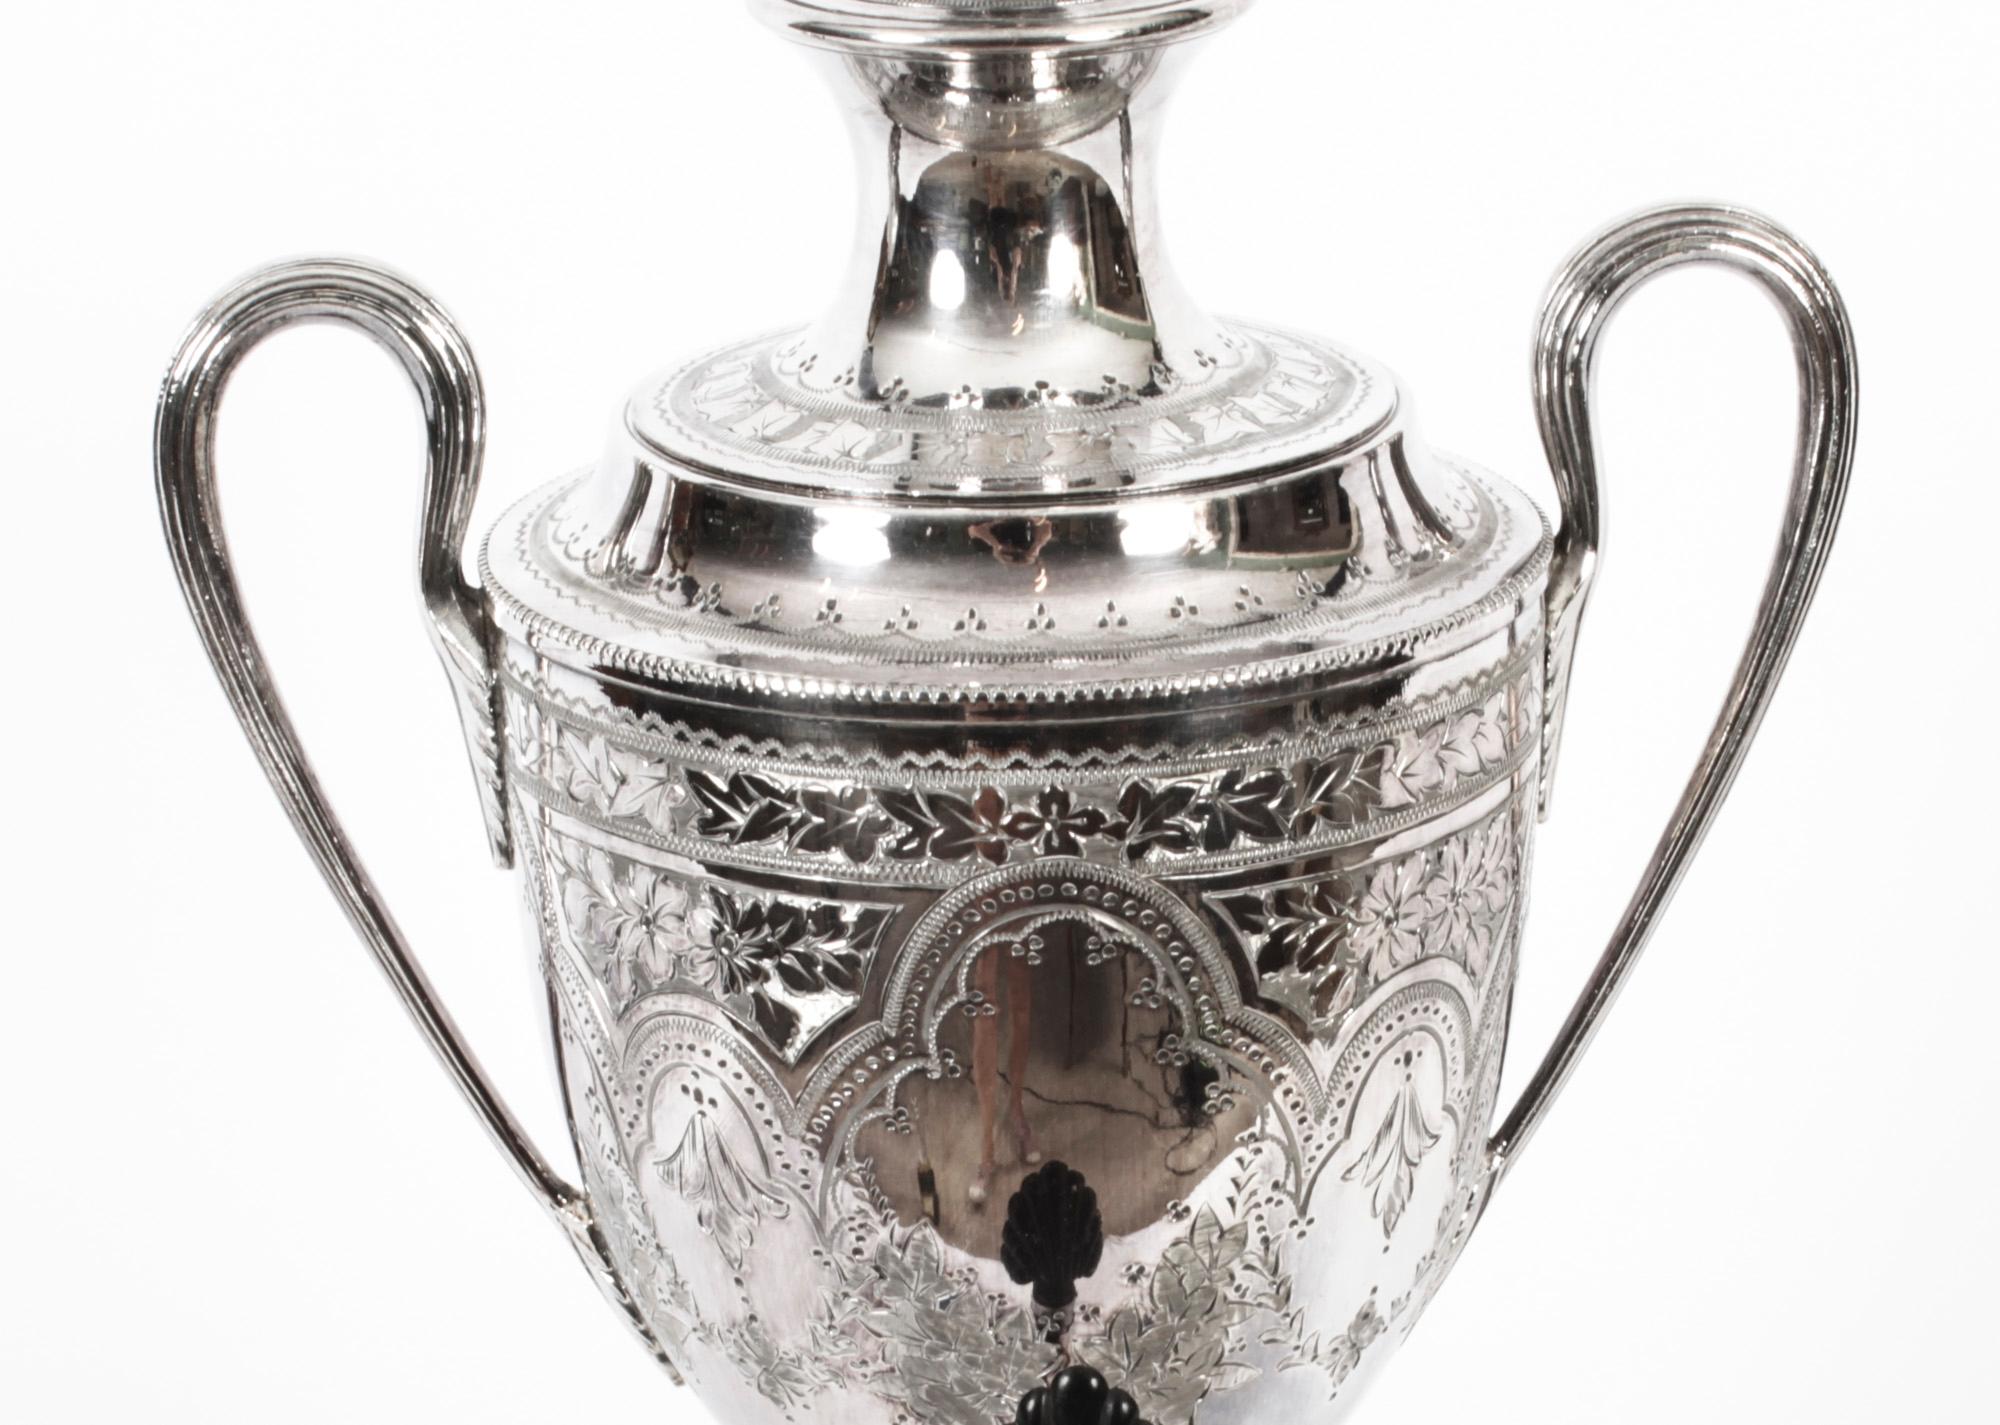 Late 19th Century Antique English Victorian Silver Plated Samovar by Pearce & Sons 19th C